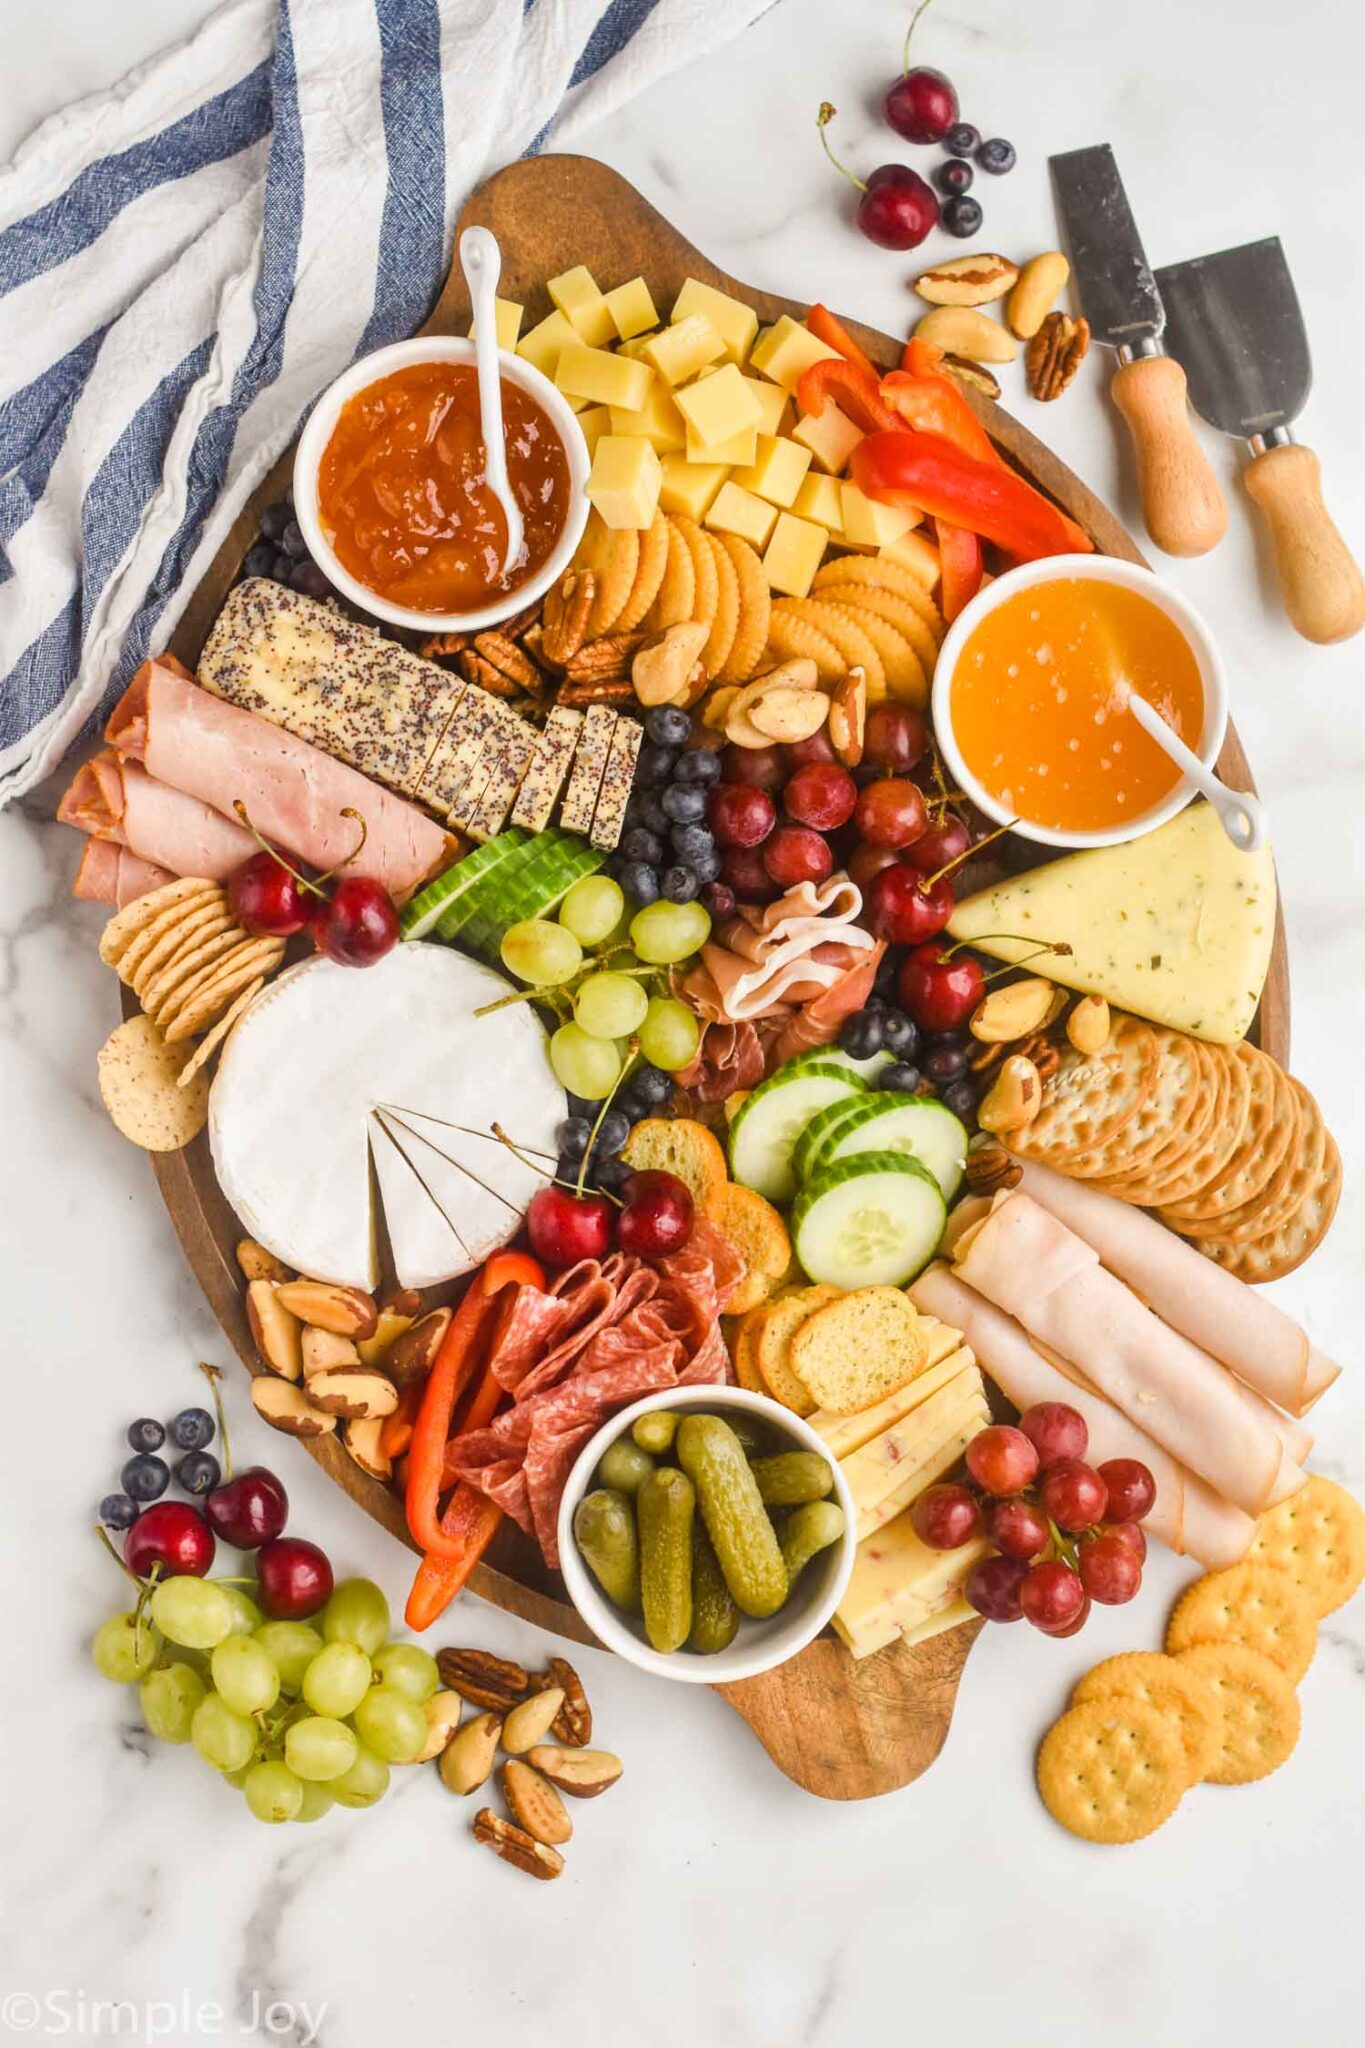 How to Make a Charcuterie Board - Simple Joy